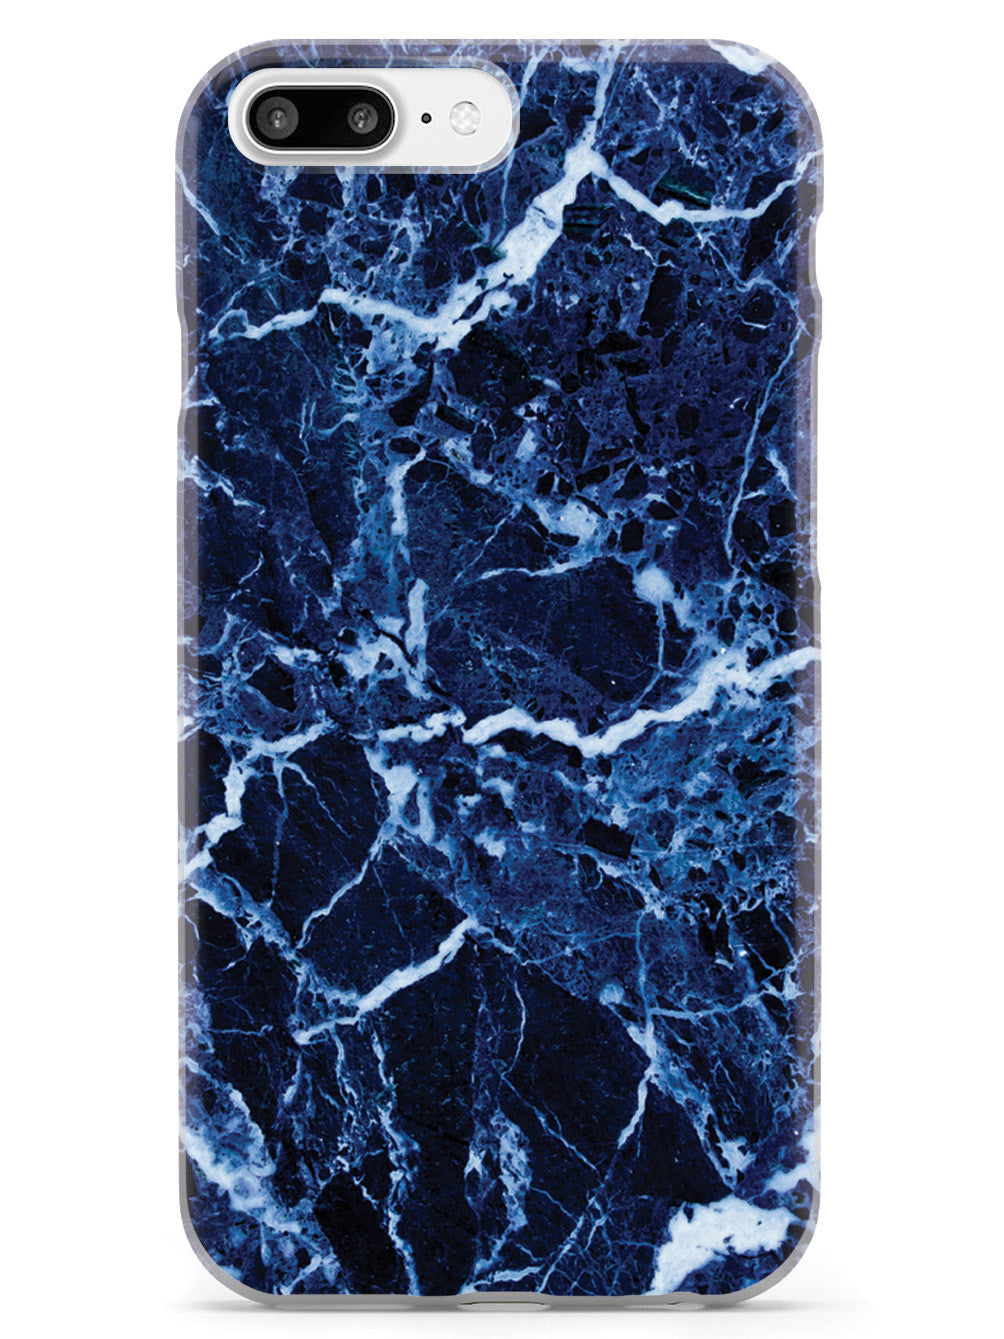 Textured Blue Marble Case